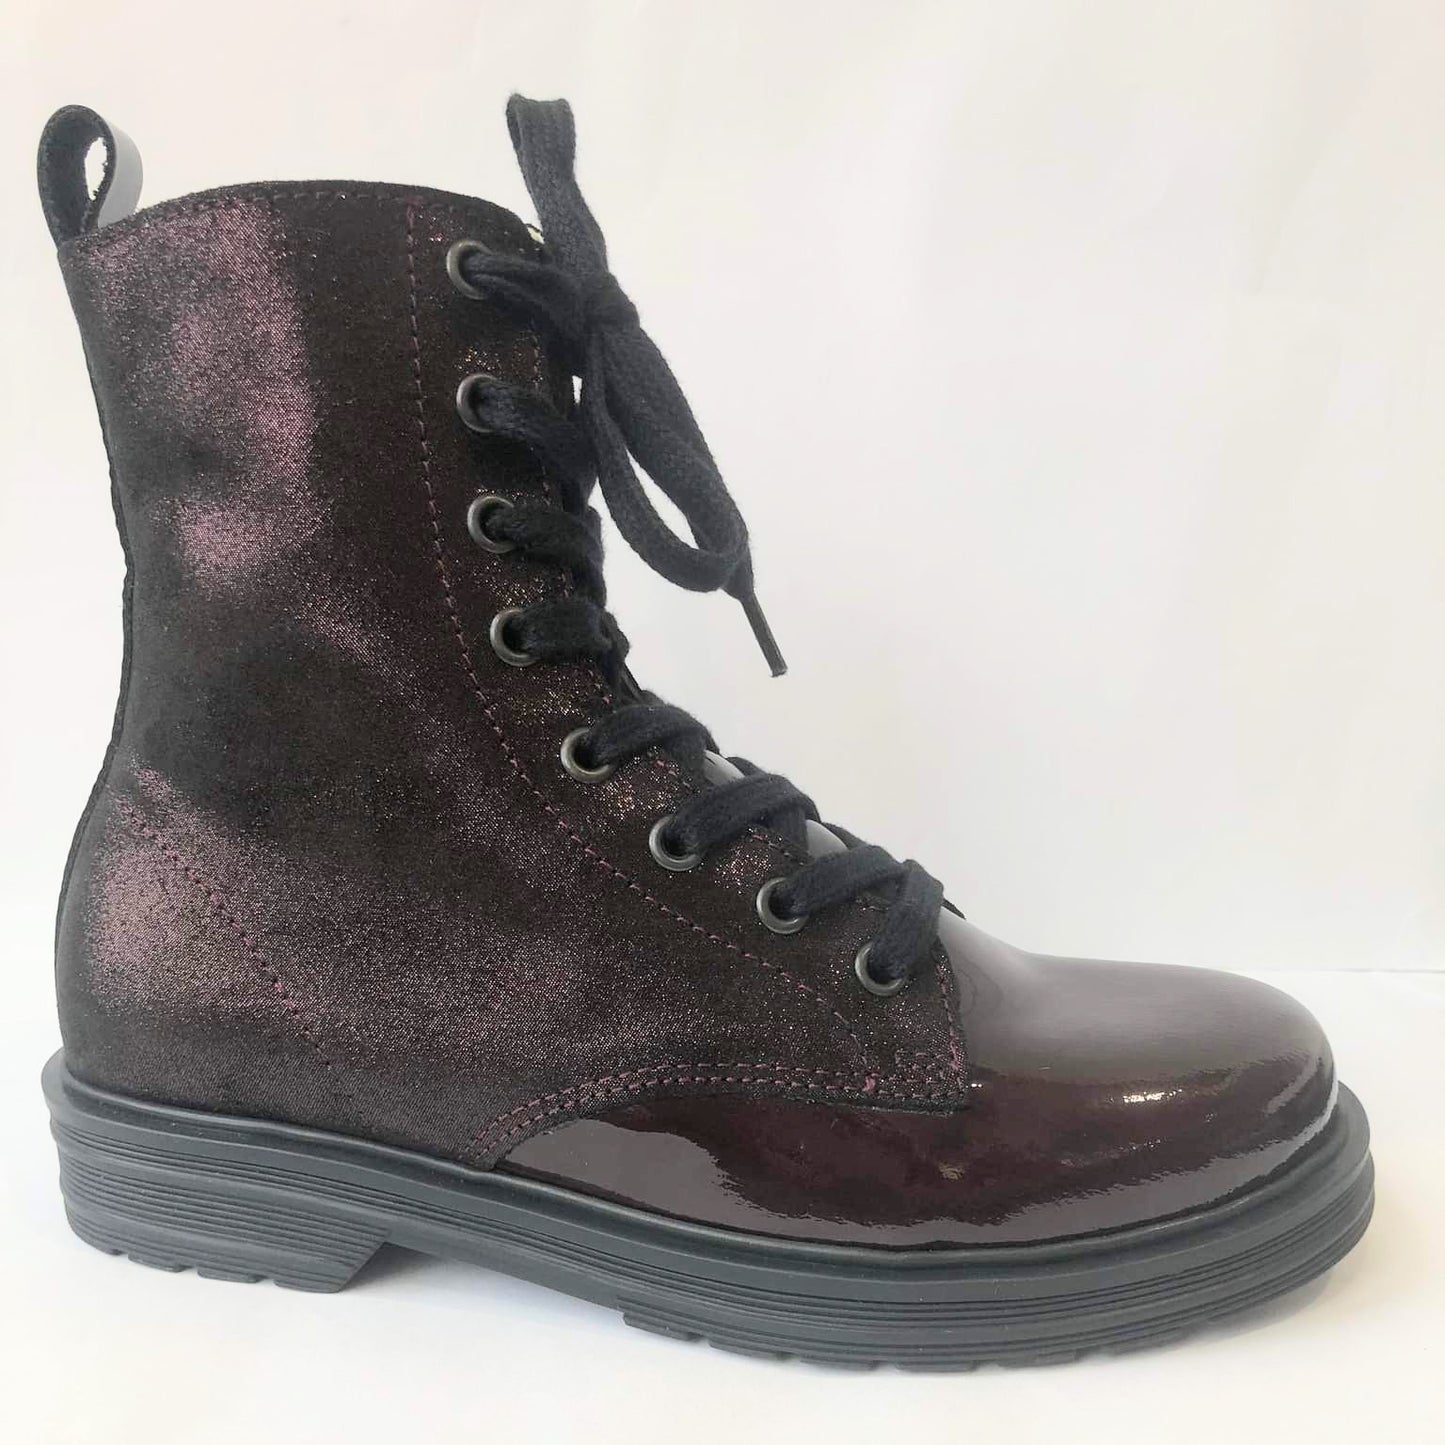 A girls boot by Petasil, style Clive 4, in burgundy patent/glitter leather with zip and lace fastening. Right side view.